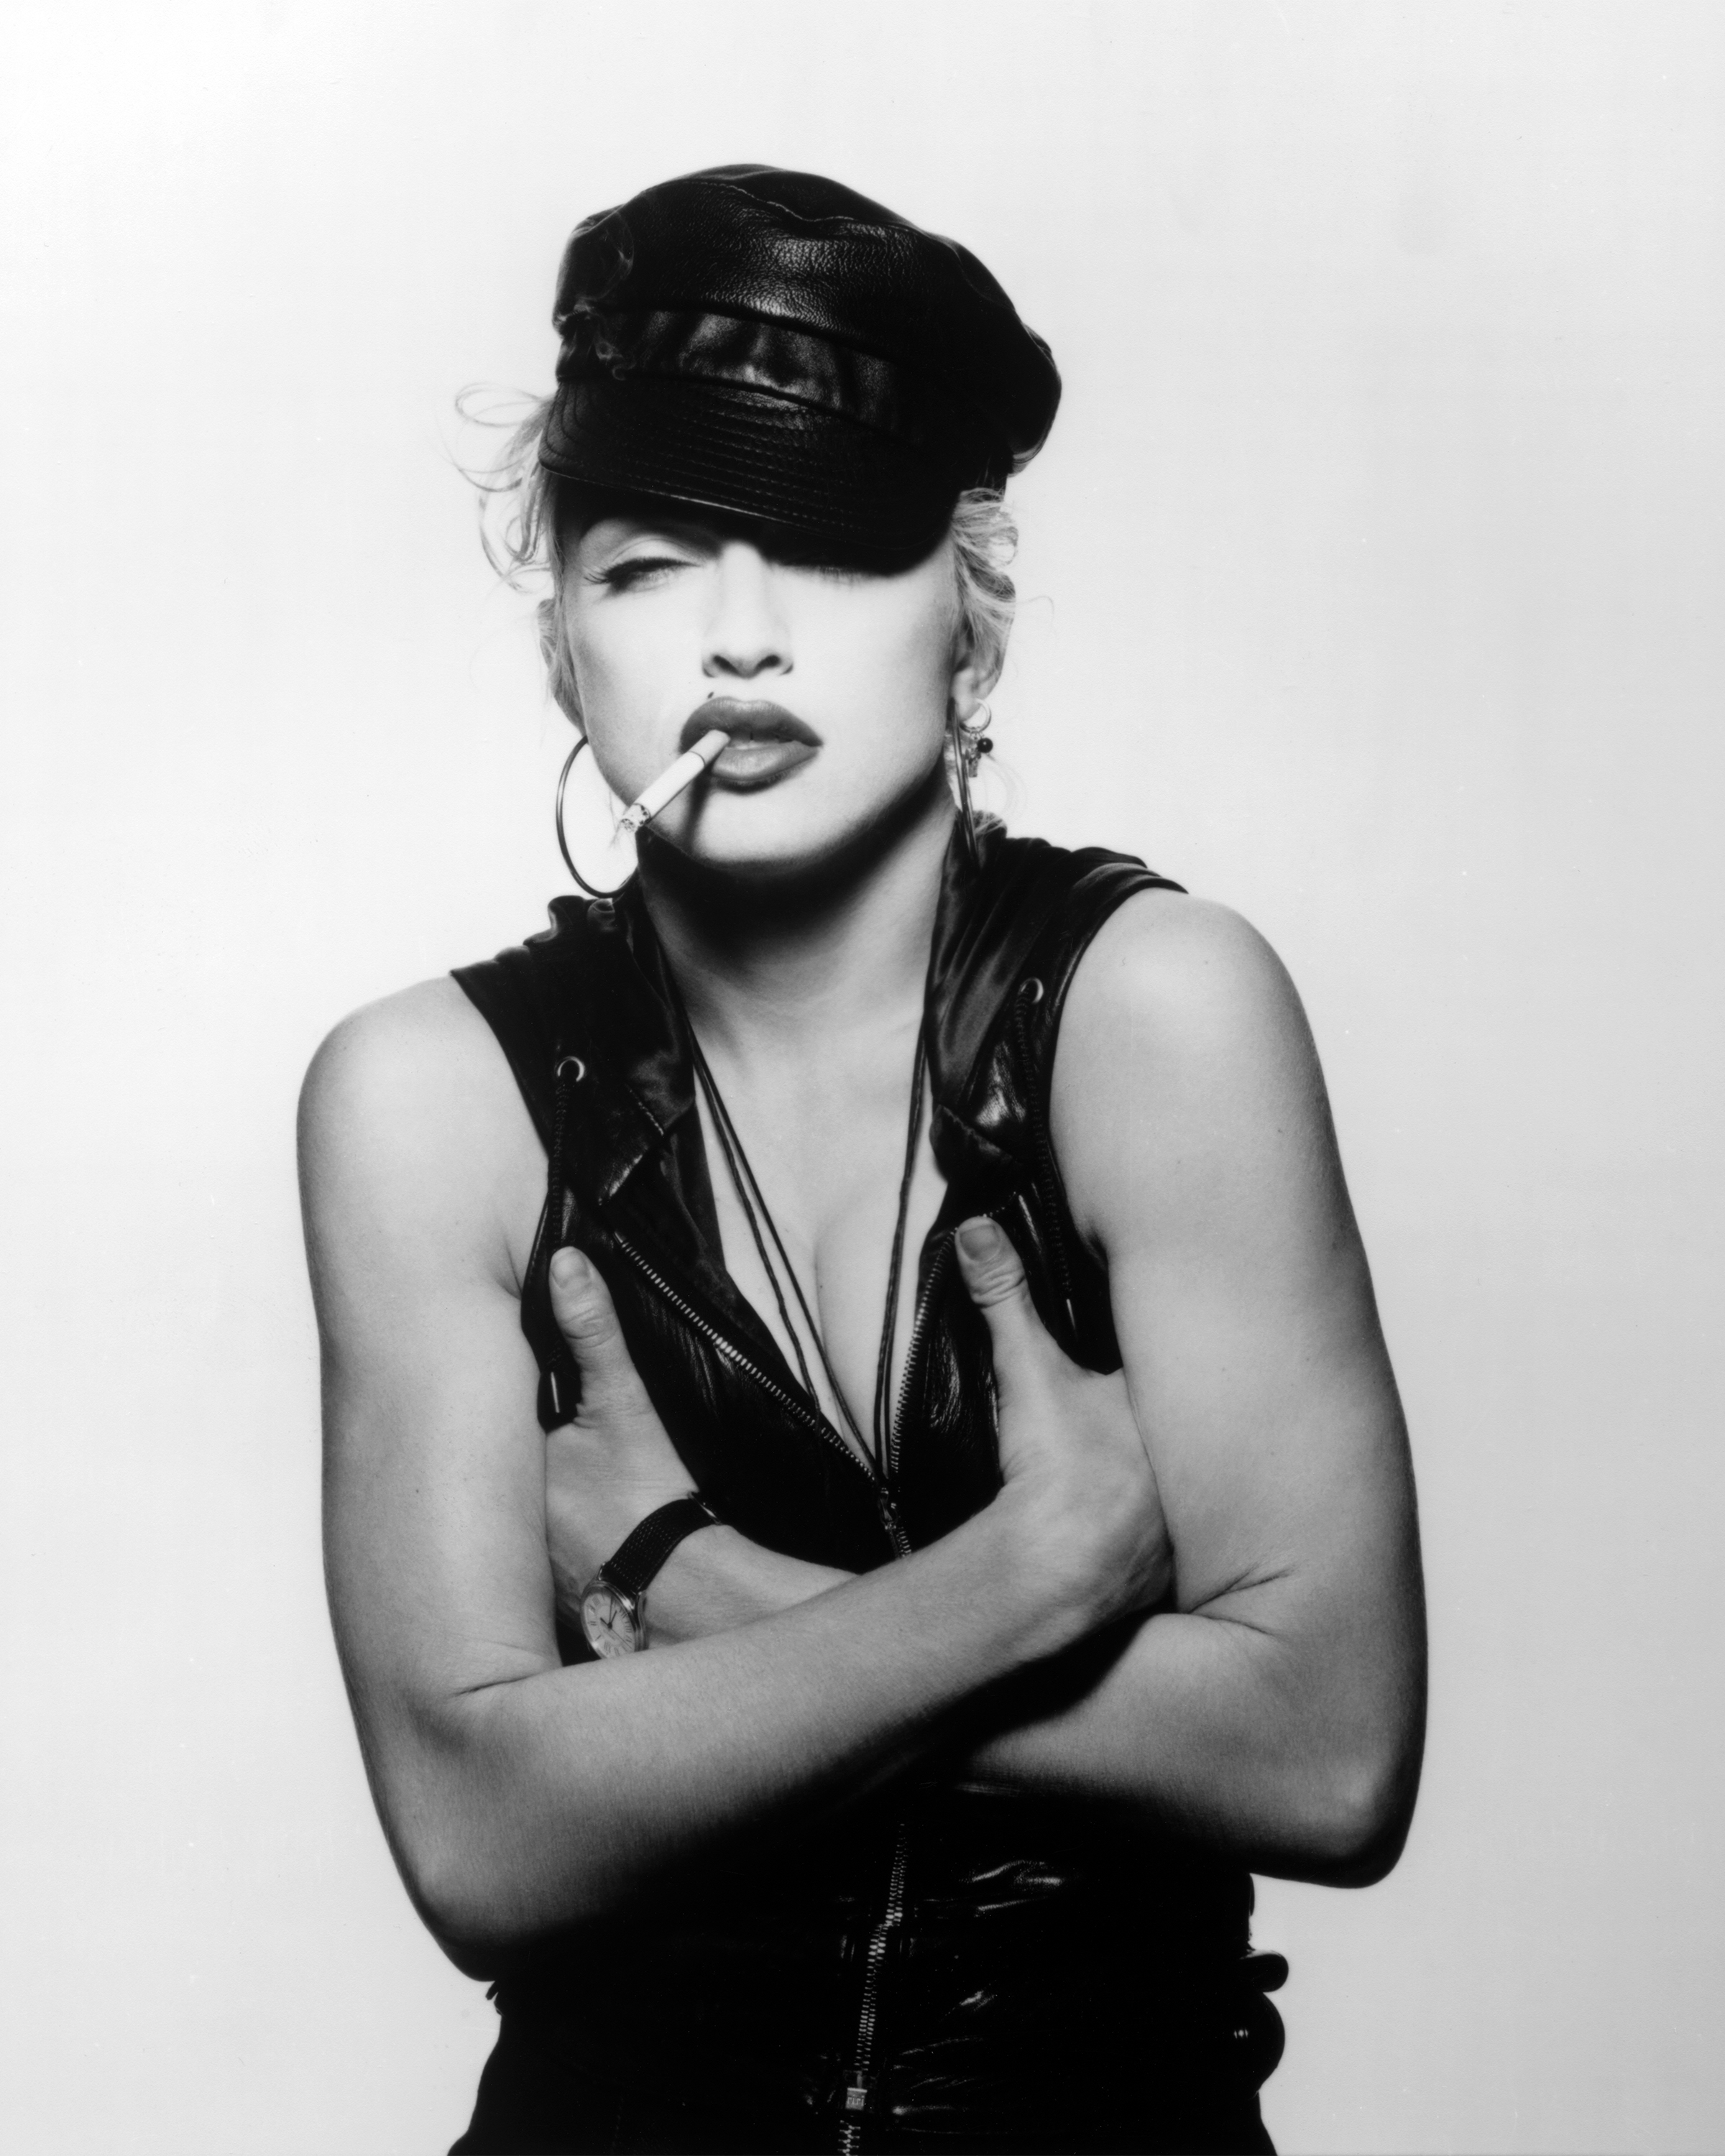 Wearing a cap with a cigarette in her mouth, Madonna crosses her arms for the camera